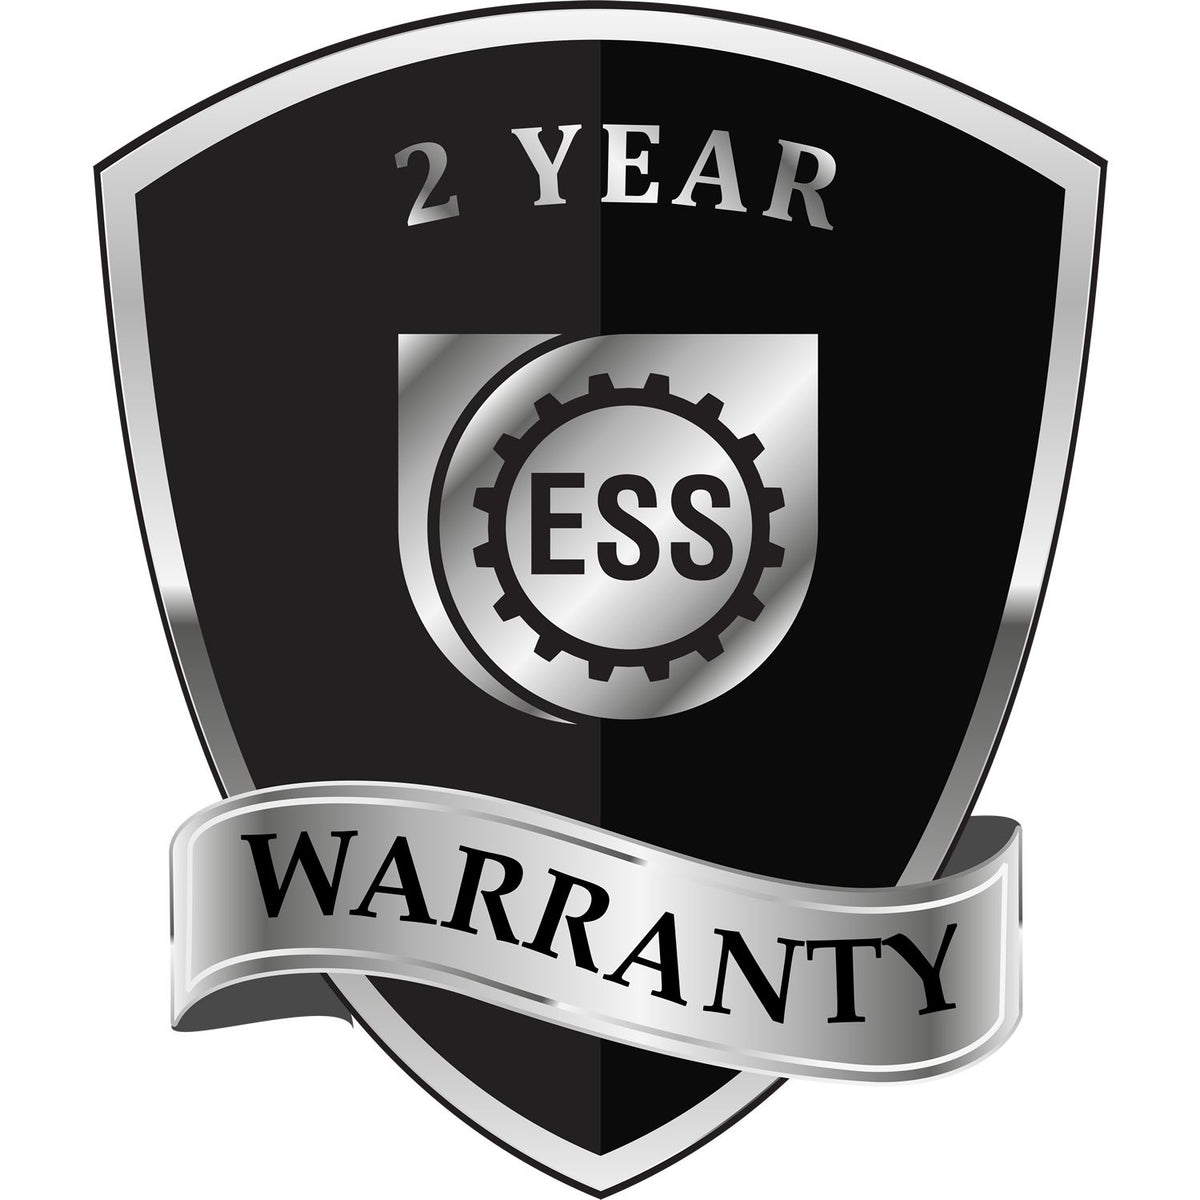 A black and silver badge or emblem showing warranty information for the Hybrid Minnesota Engineer Seal